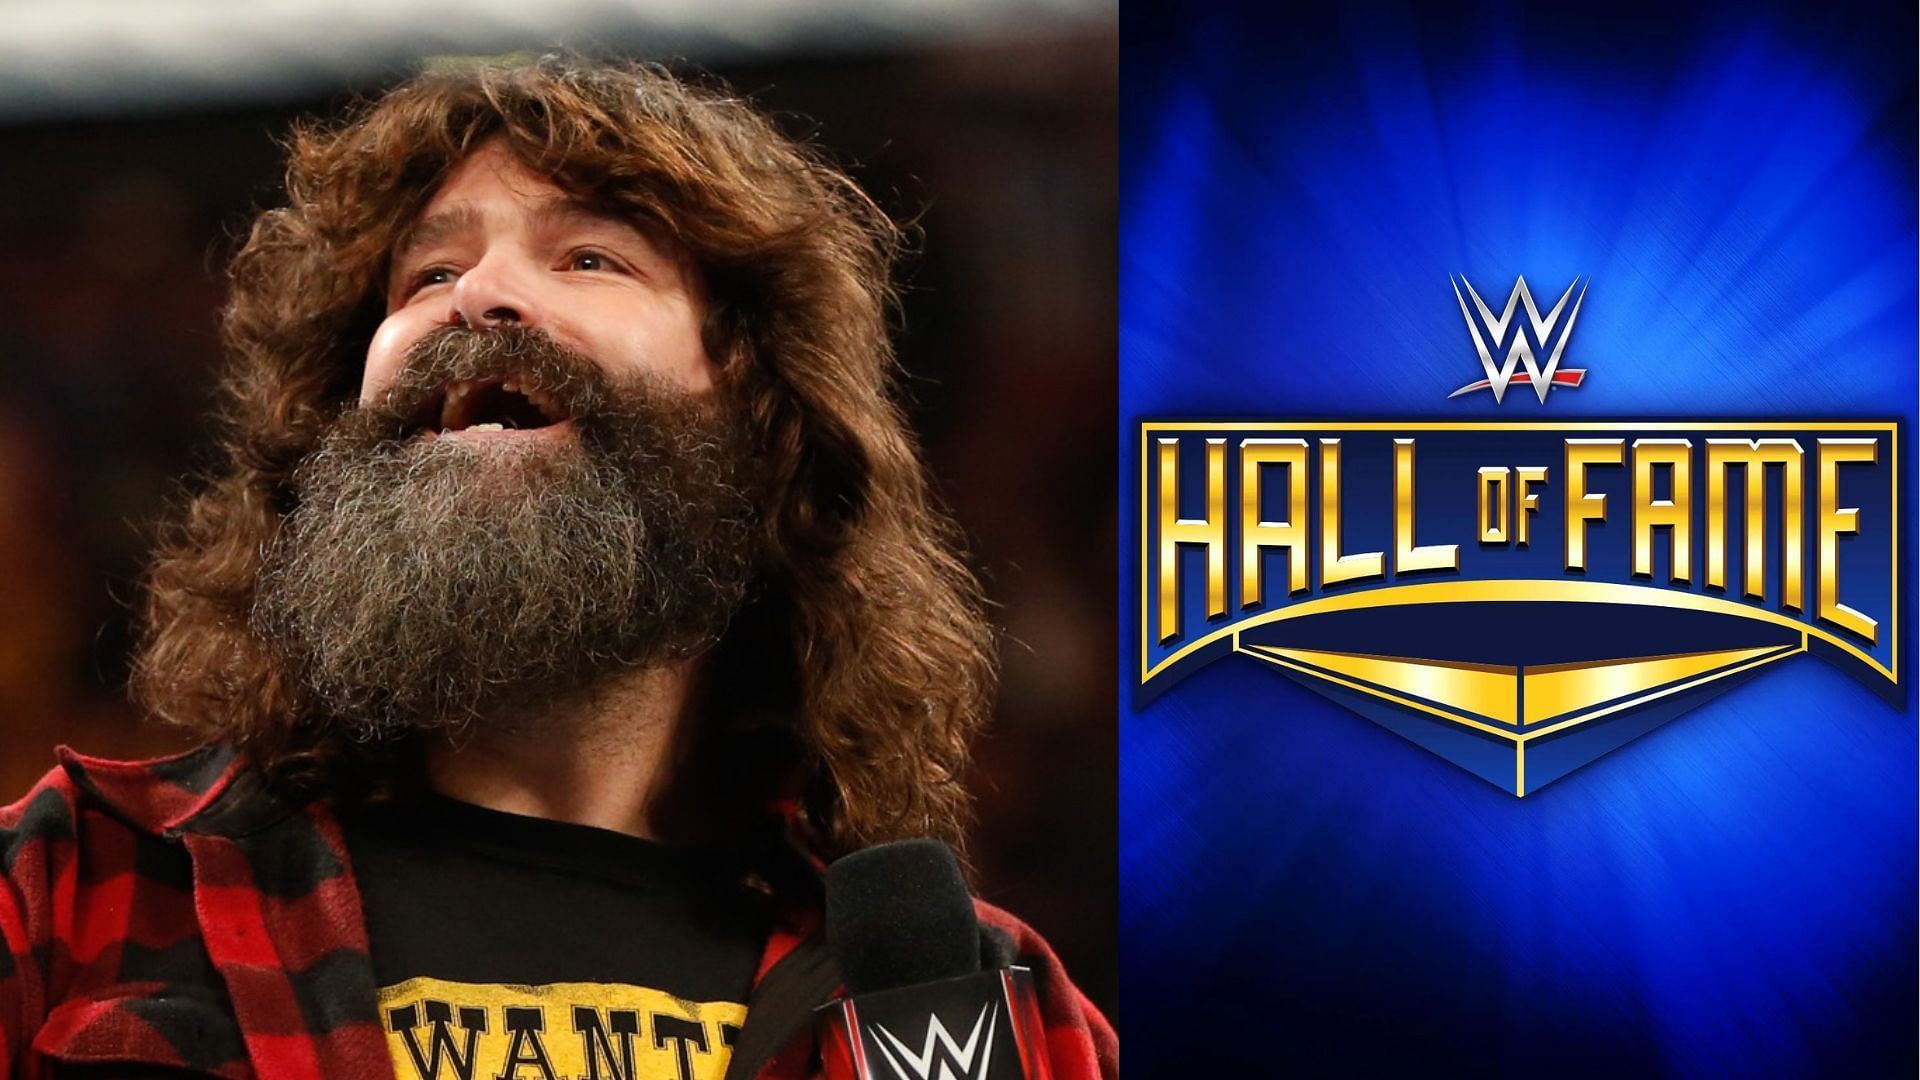 WWE legend Mick Foley may be inducting someone into the Hall of Fame